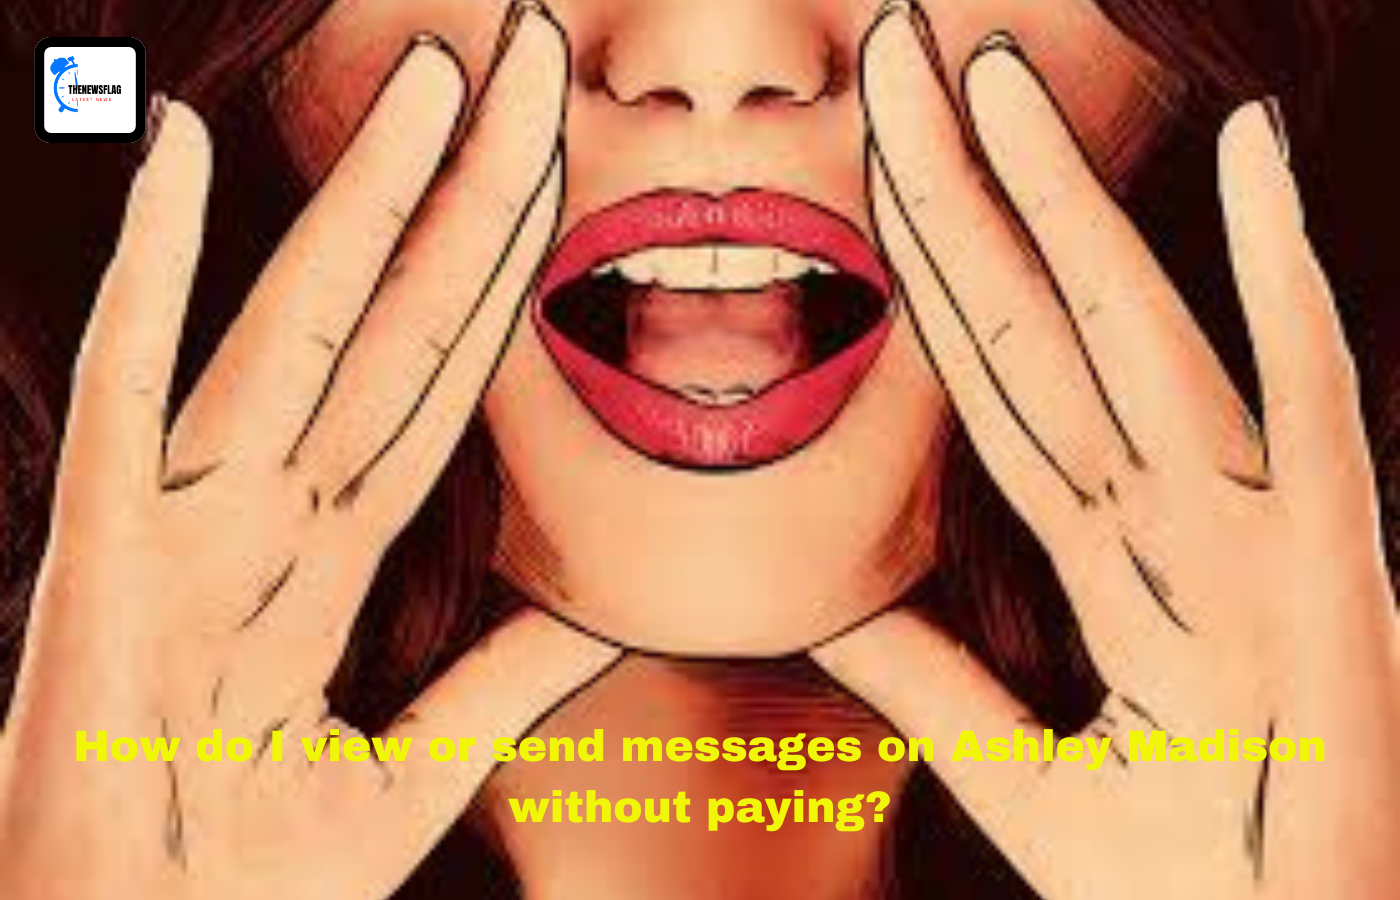 How do I view or send messages on Ashley Madison without paying?